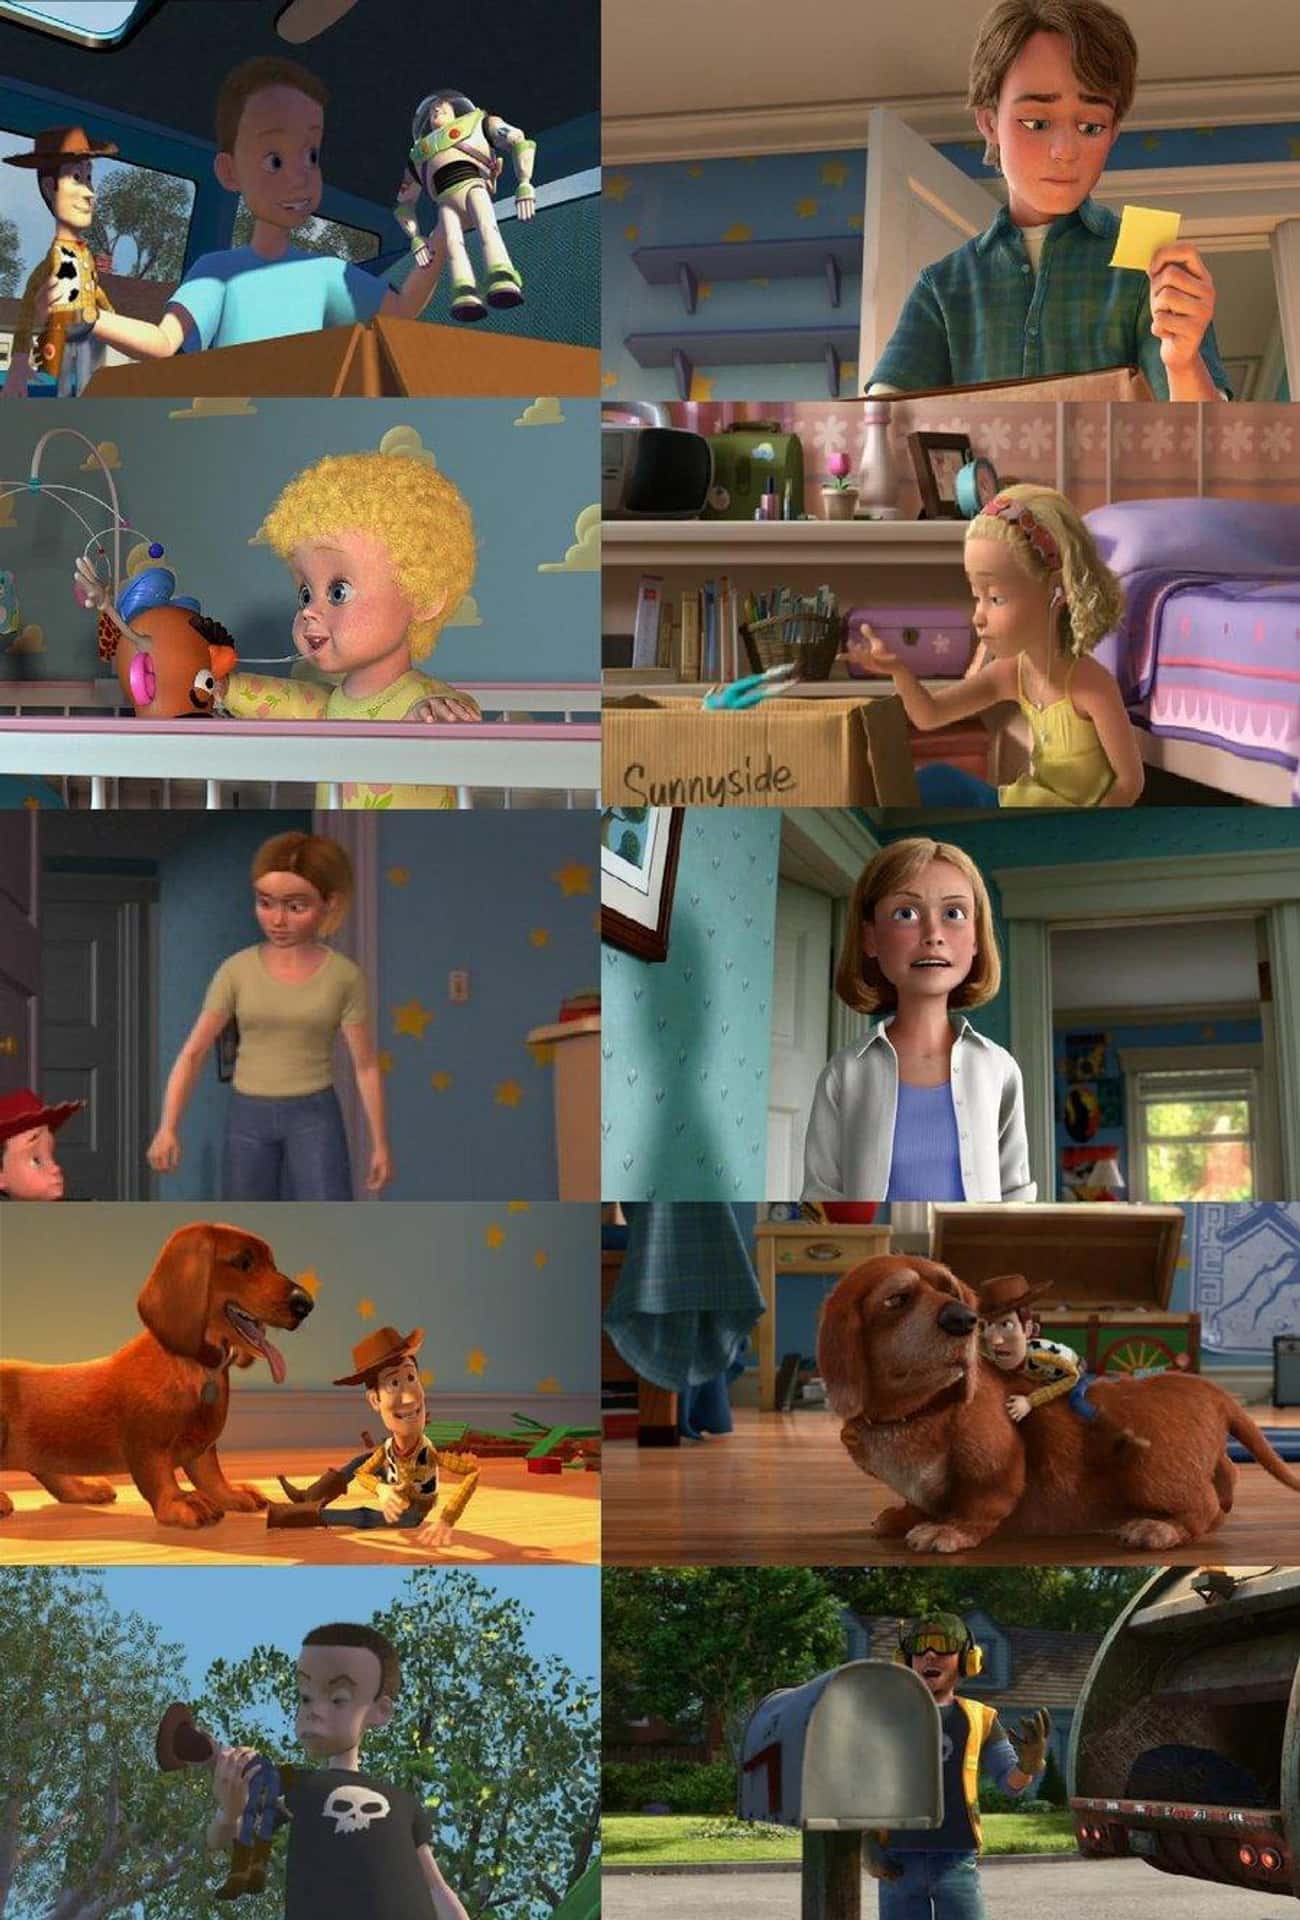 Each Toy Story Film Has a Special Place in Film History